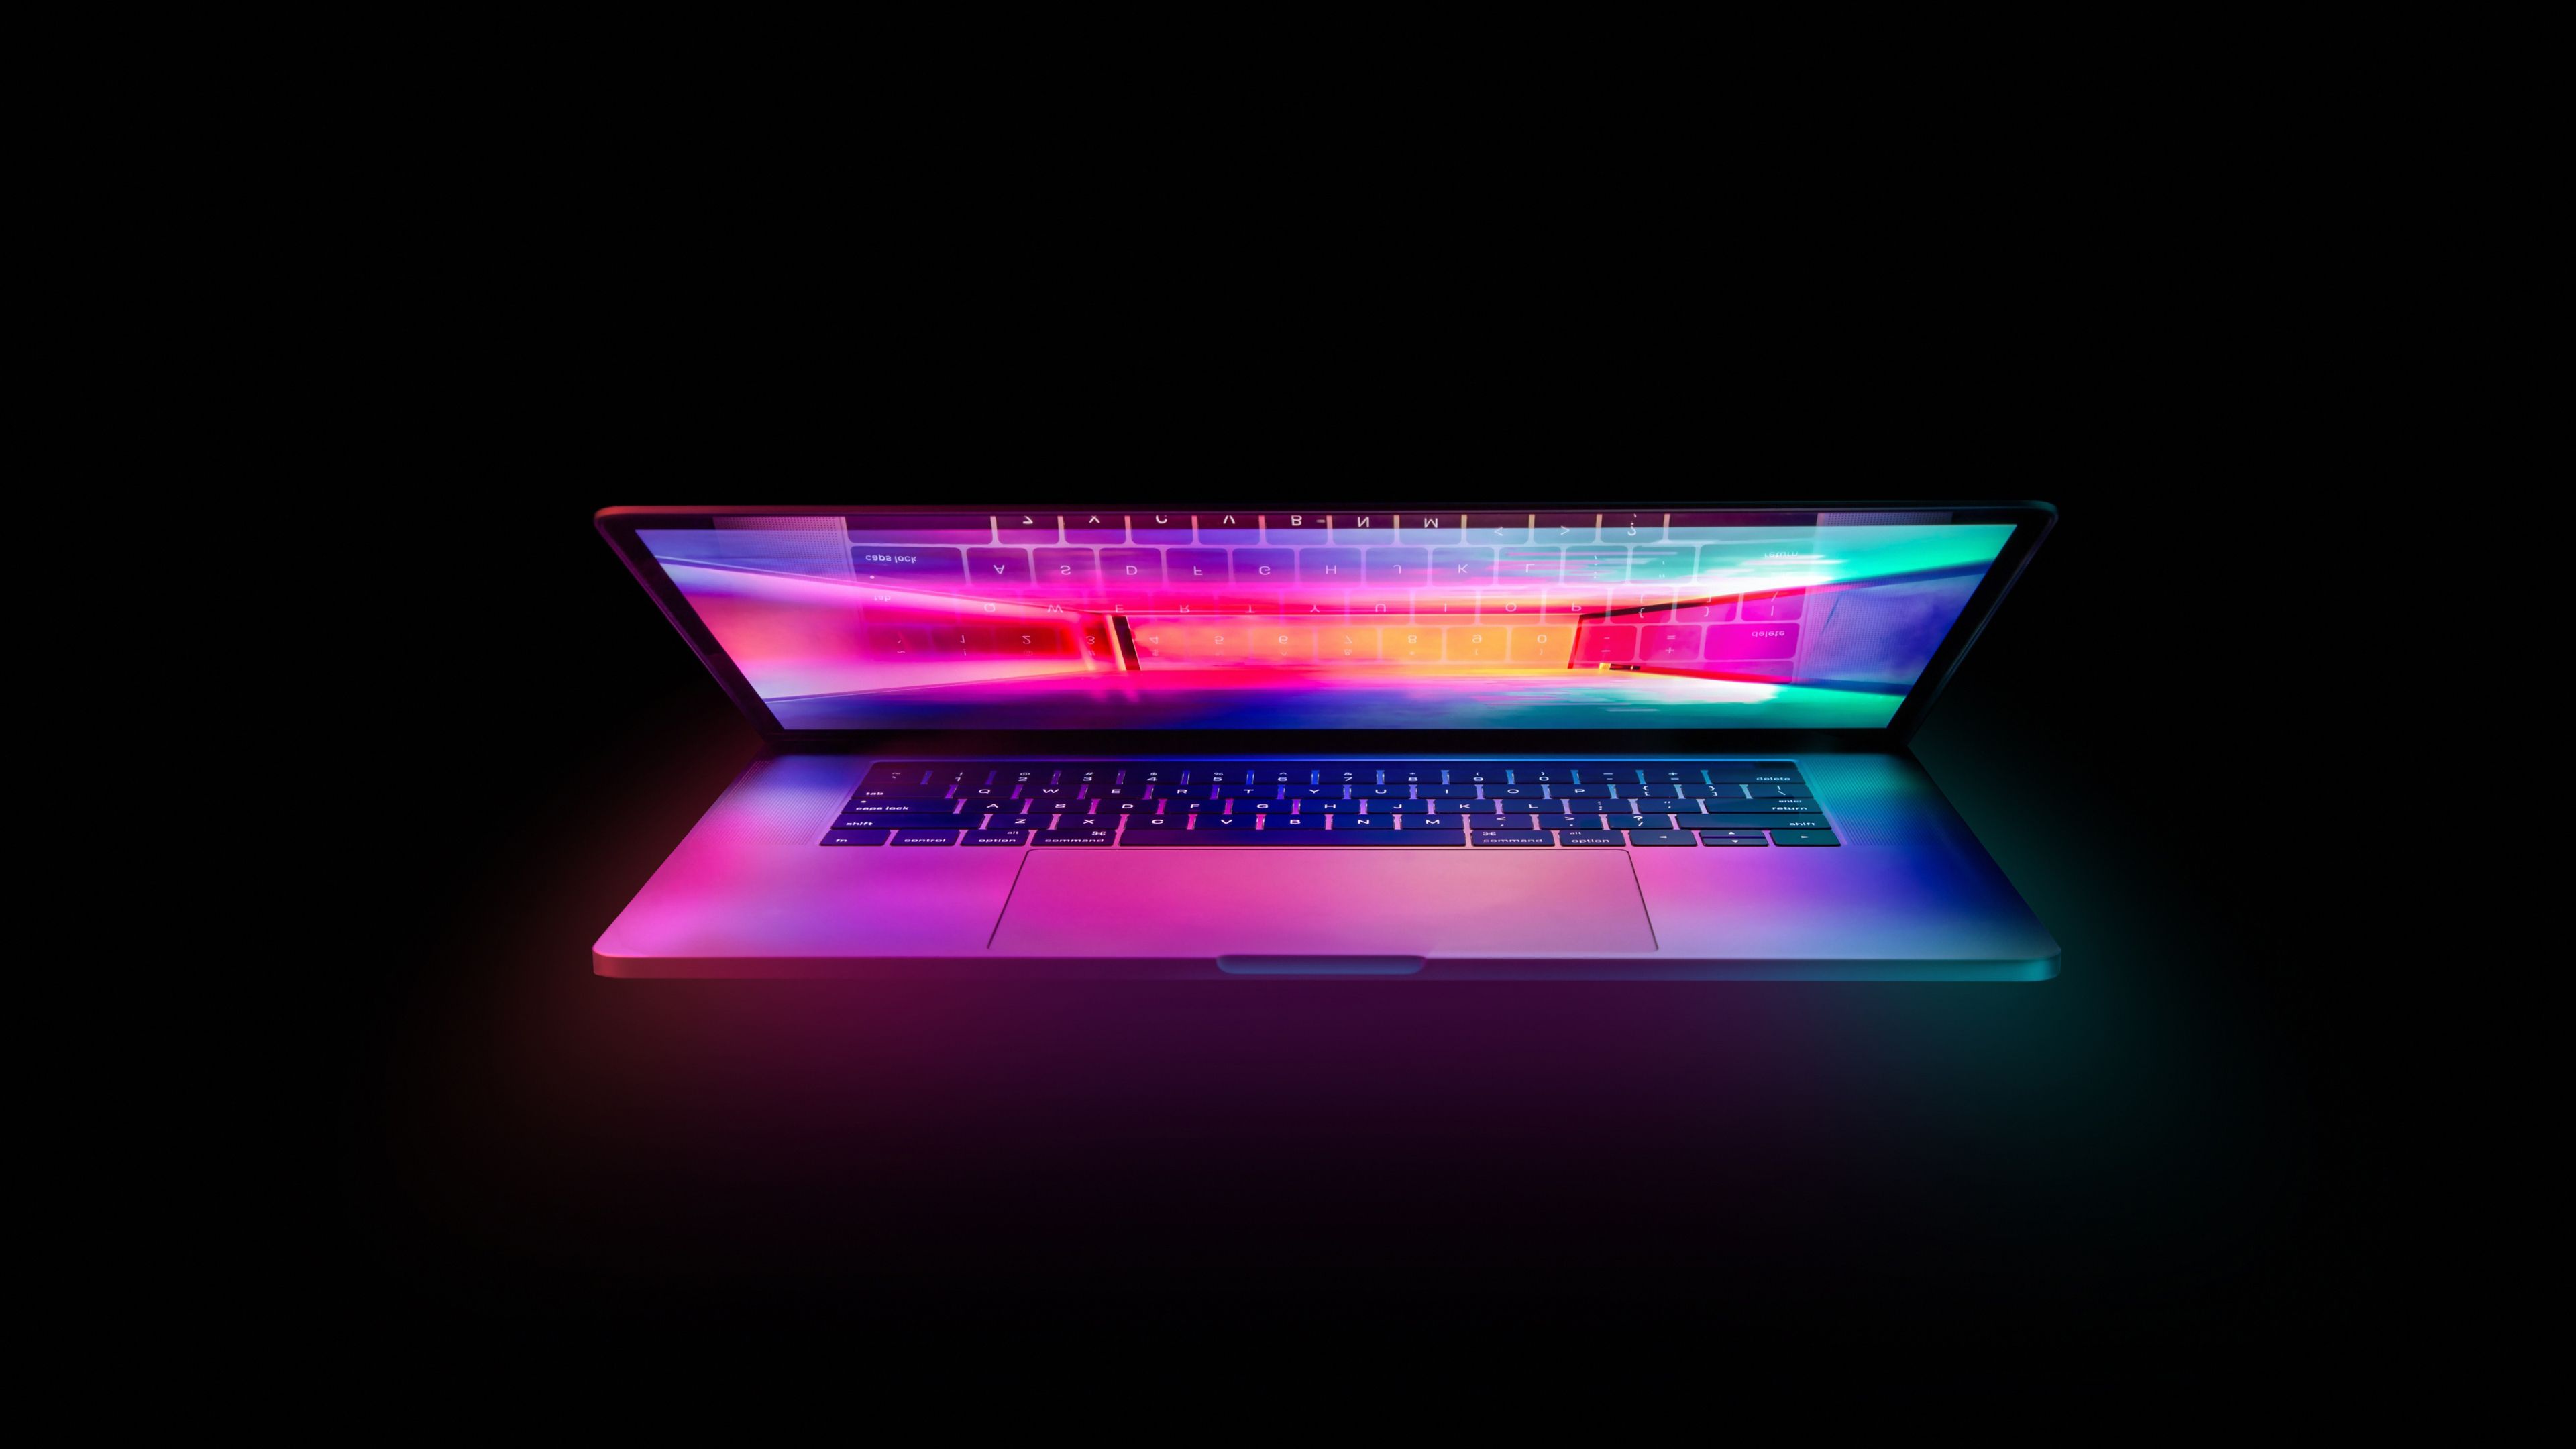 Colorful Laptop With Black Background 4K HD Black Aesthetic Wallpaper